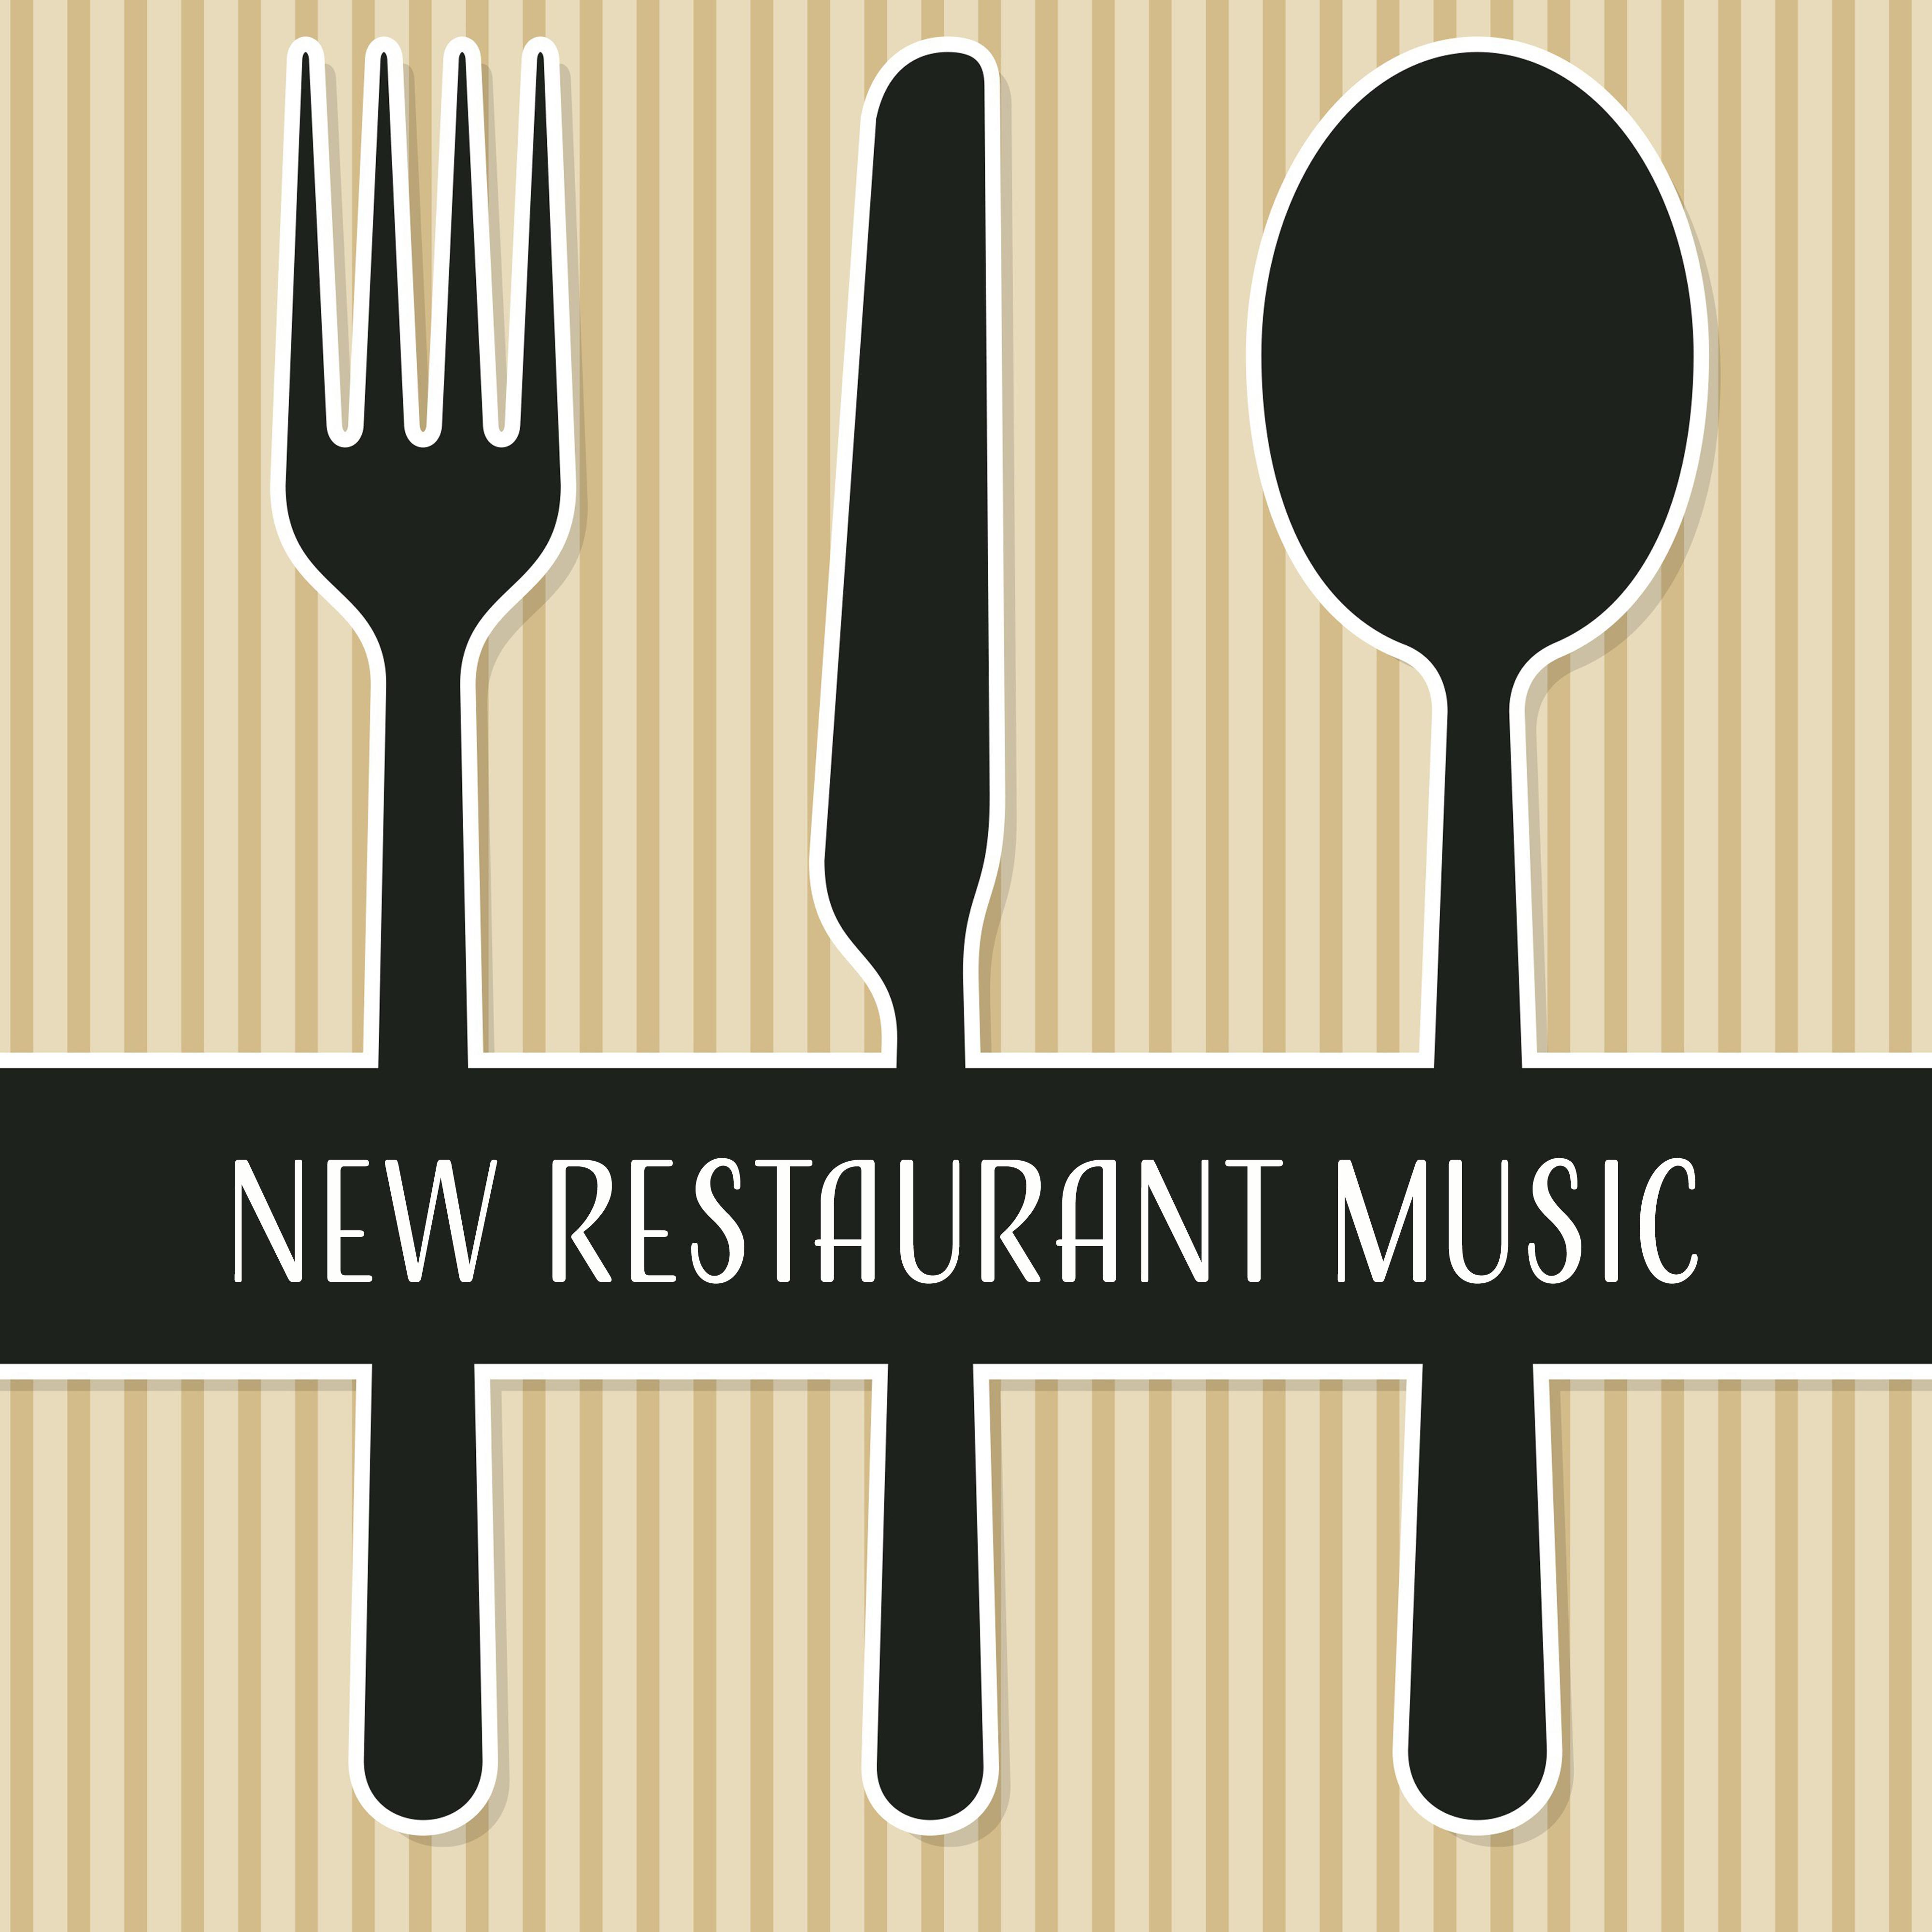 New Restaurant Music – Ambient Jazz, Smooth Jazz for Cafe & Restaurant, Relax